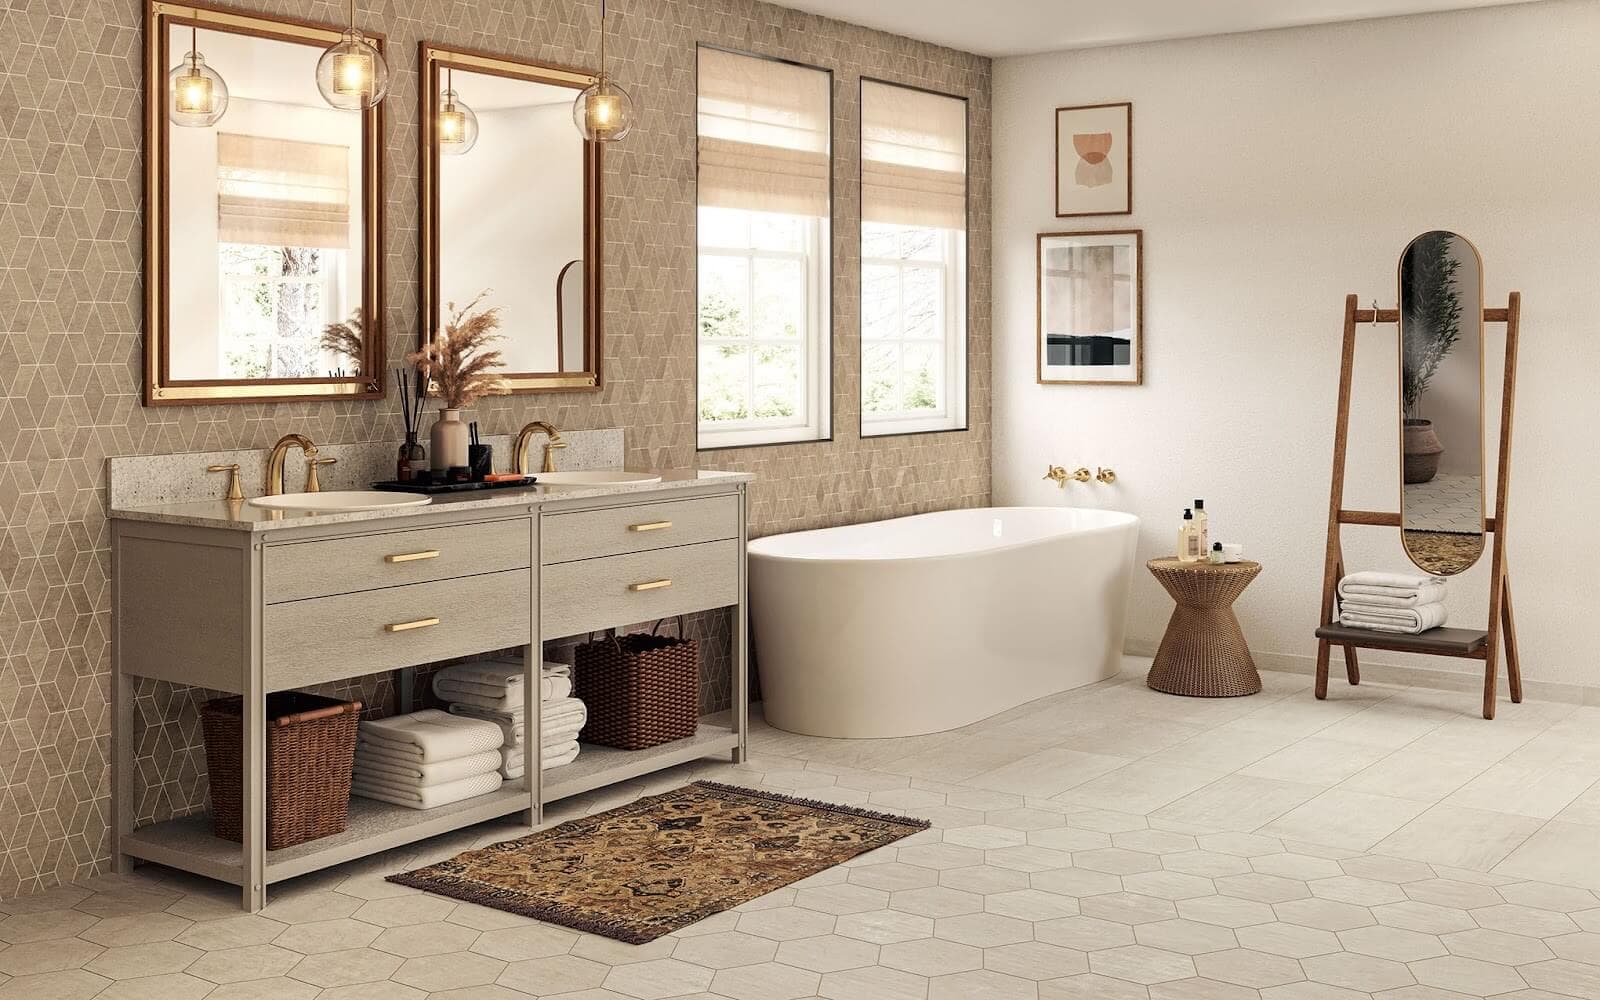 bathroom with warm stone-look mosaic tile and rustic style